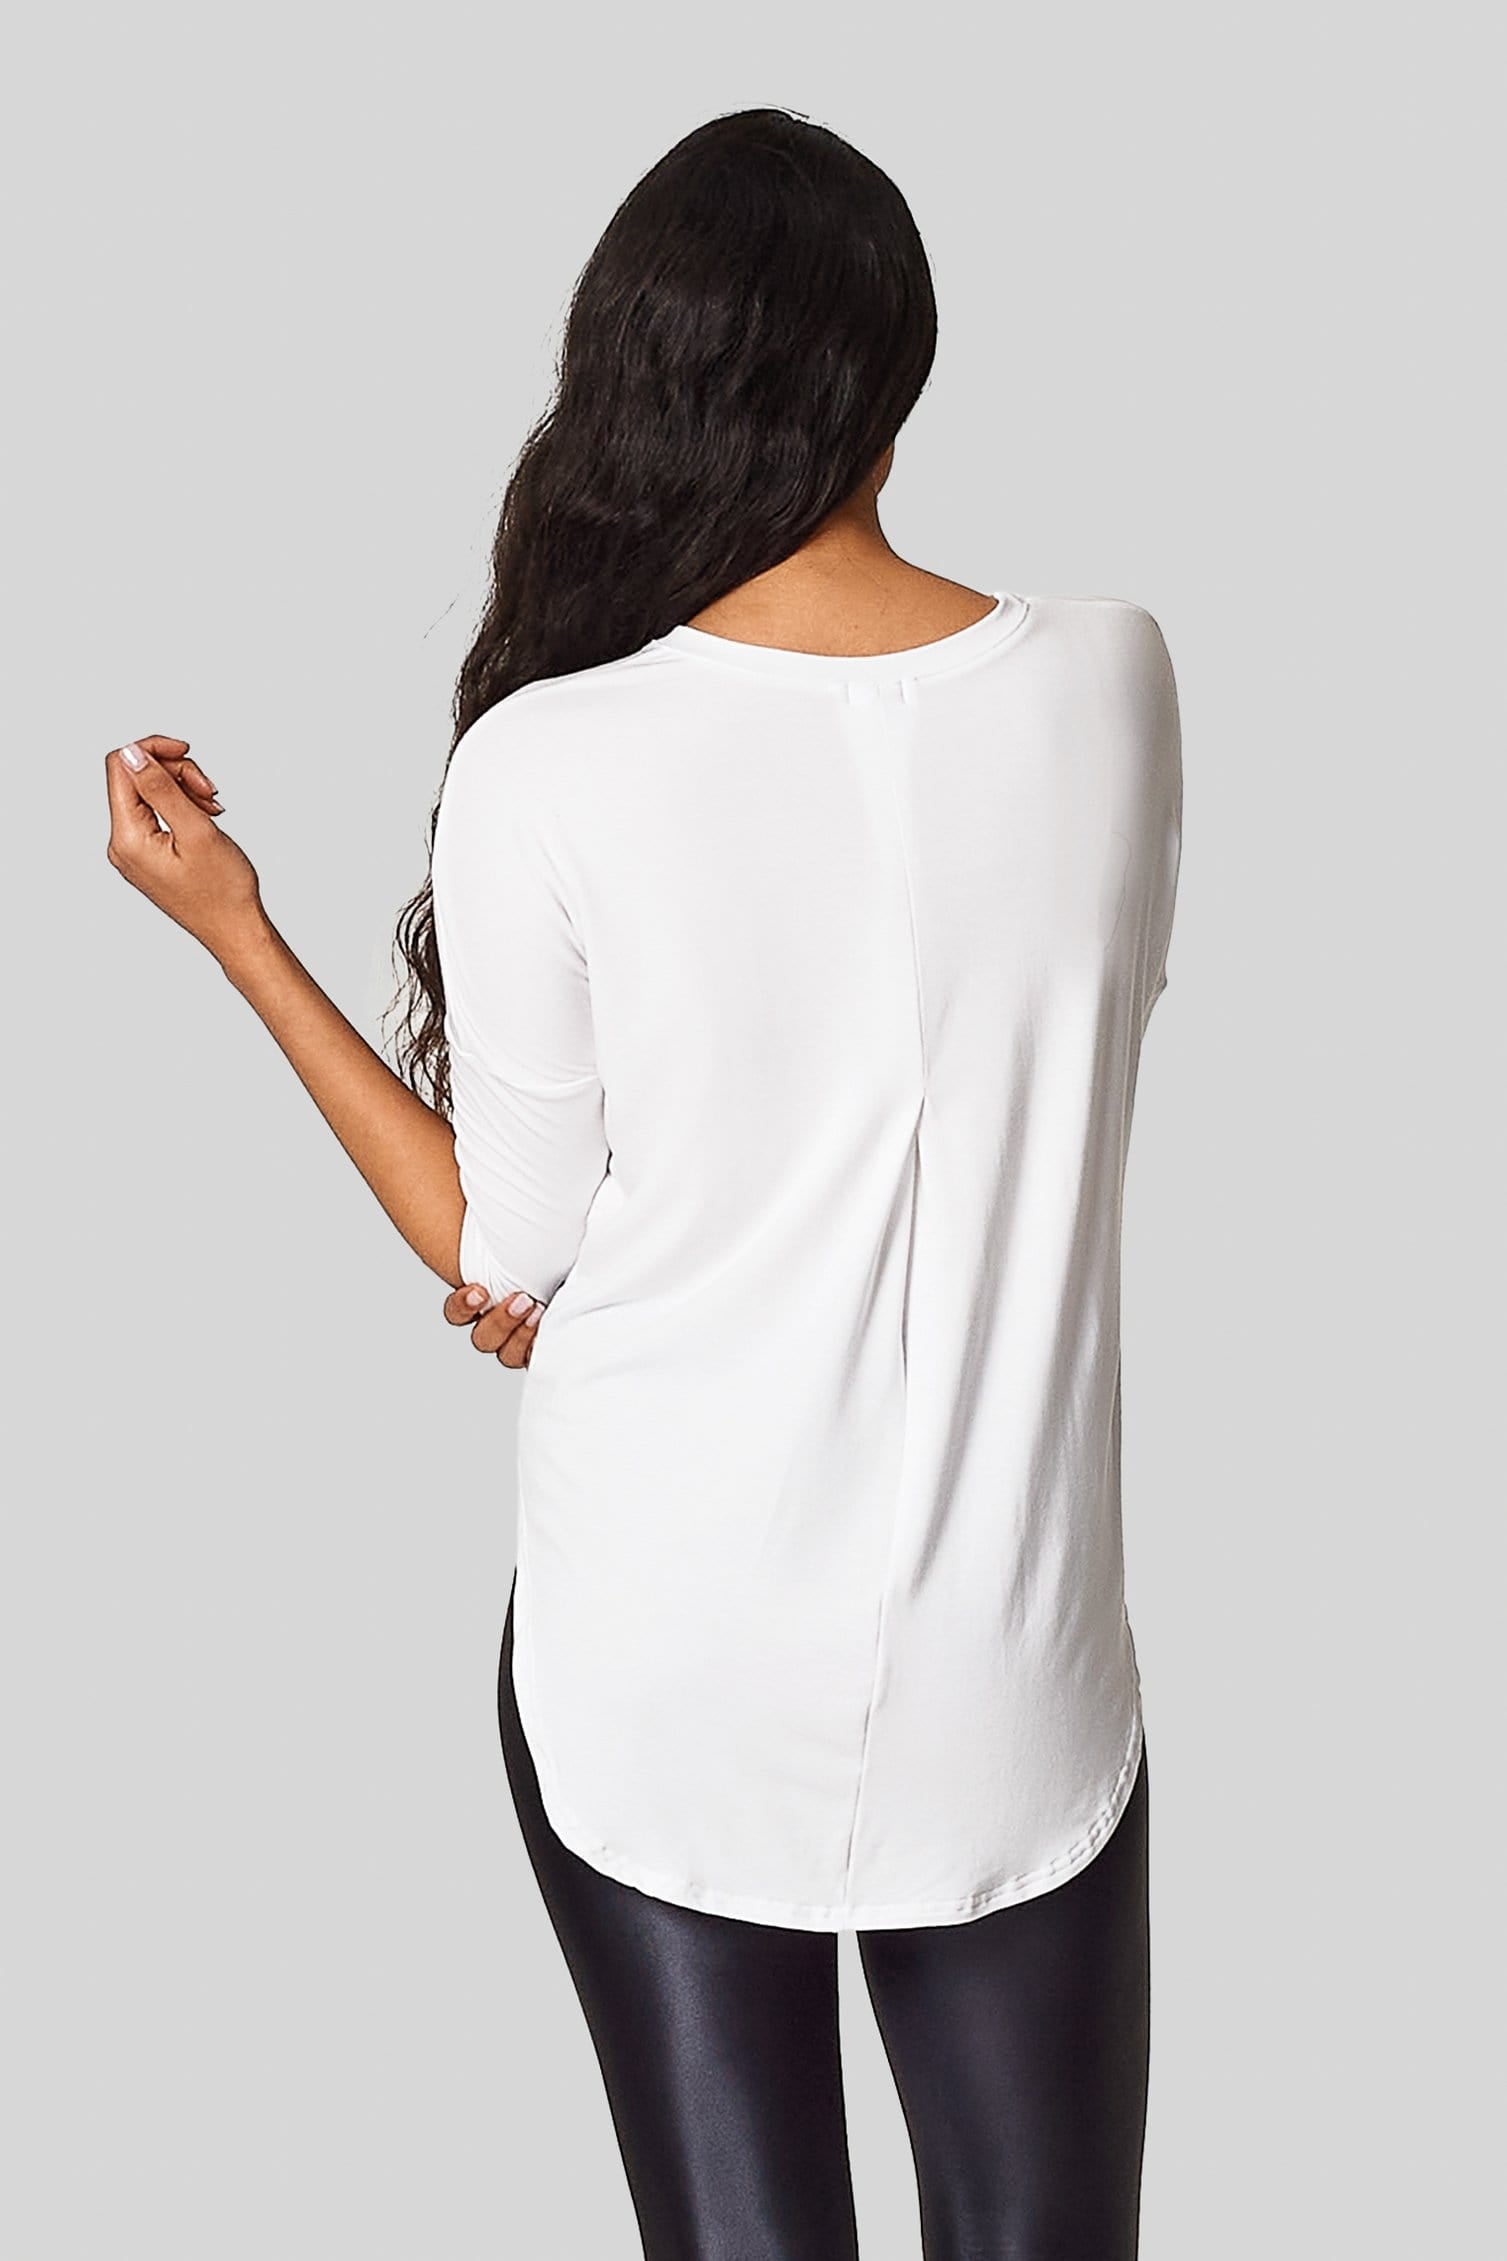 The back view of the Ainsley Tee with a back box pleat and low hem for bum coverage.